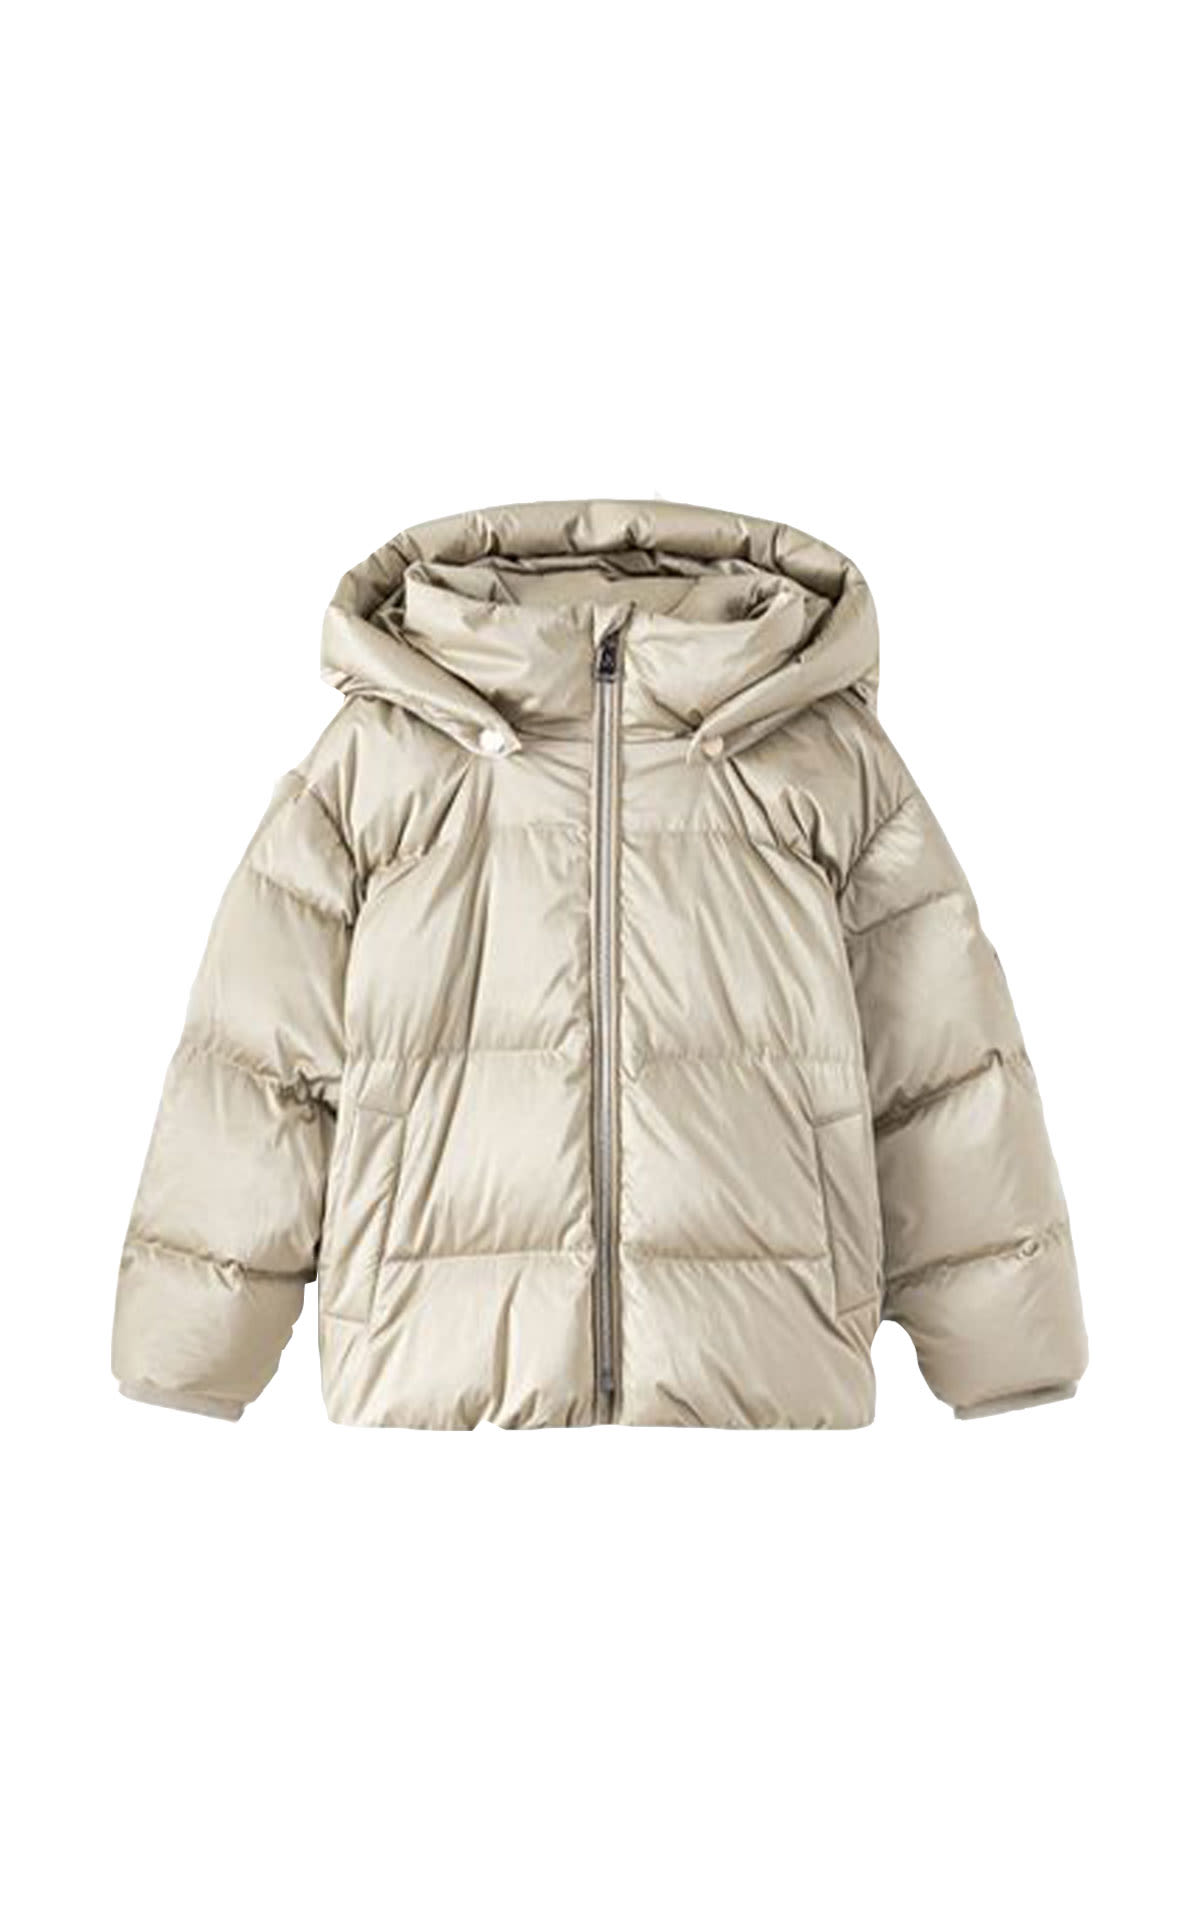 Bonpoint Girl's puffer jacket from Bicester Village